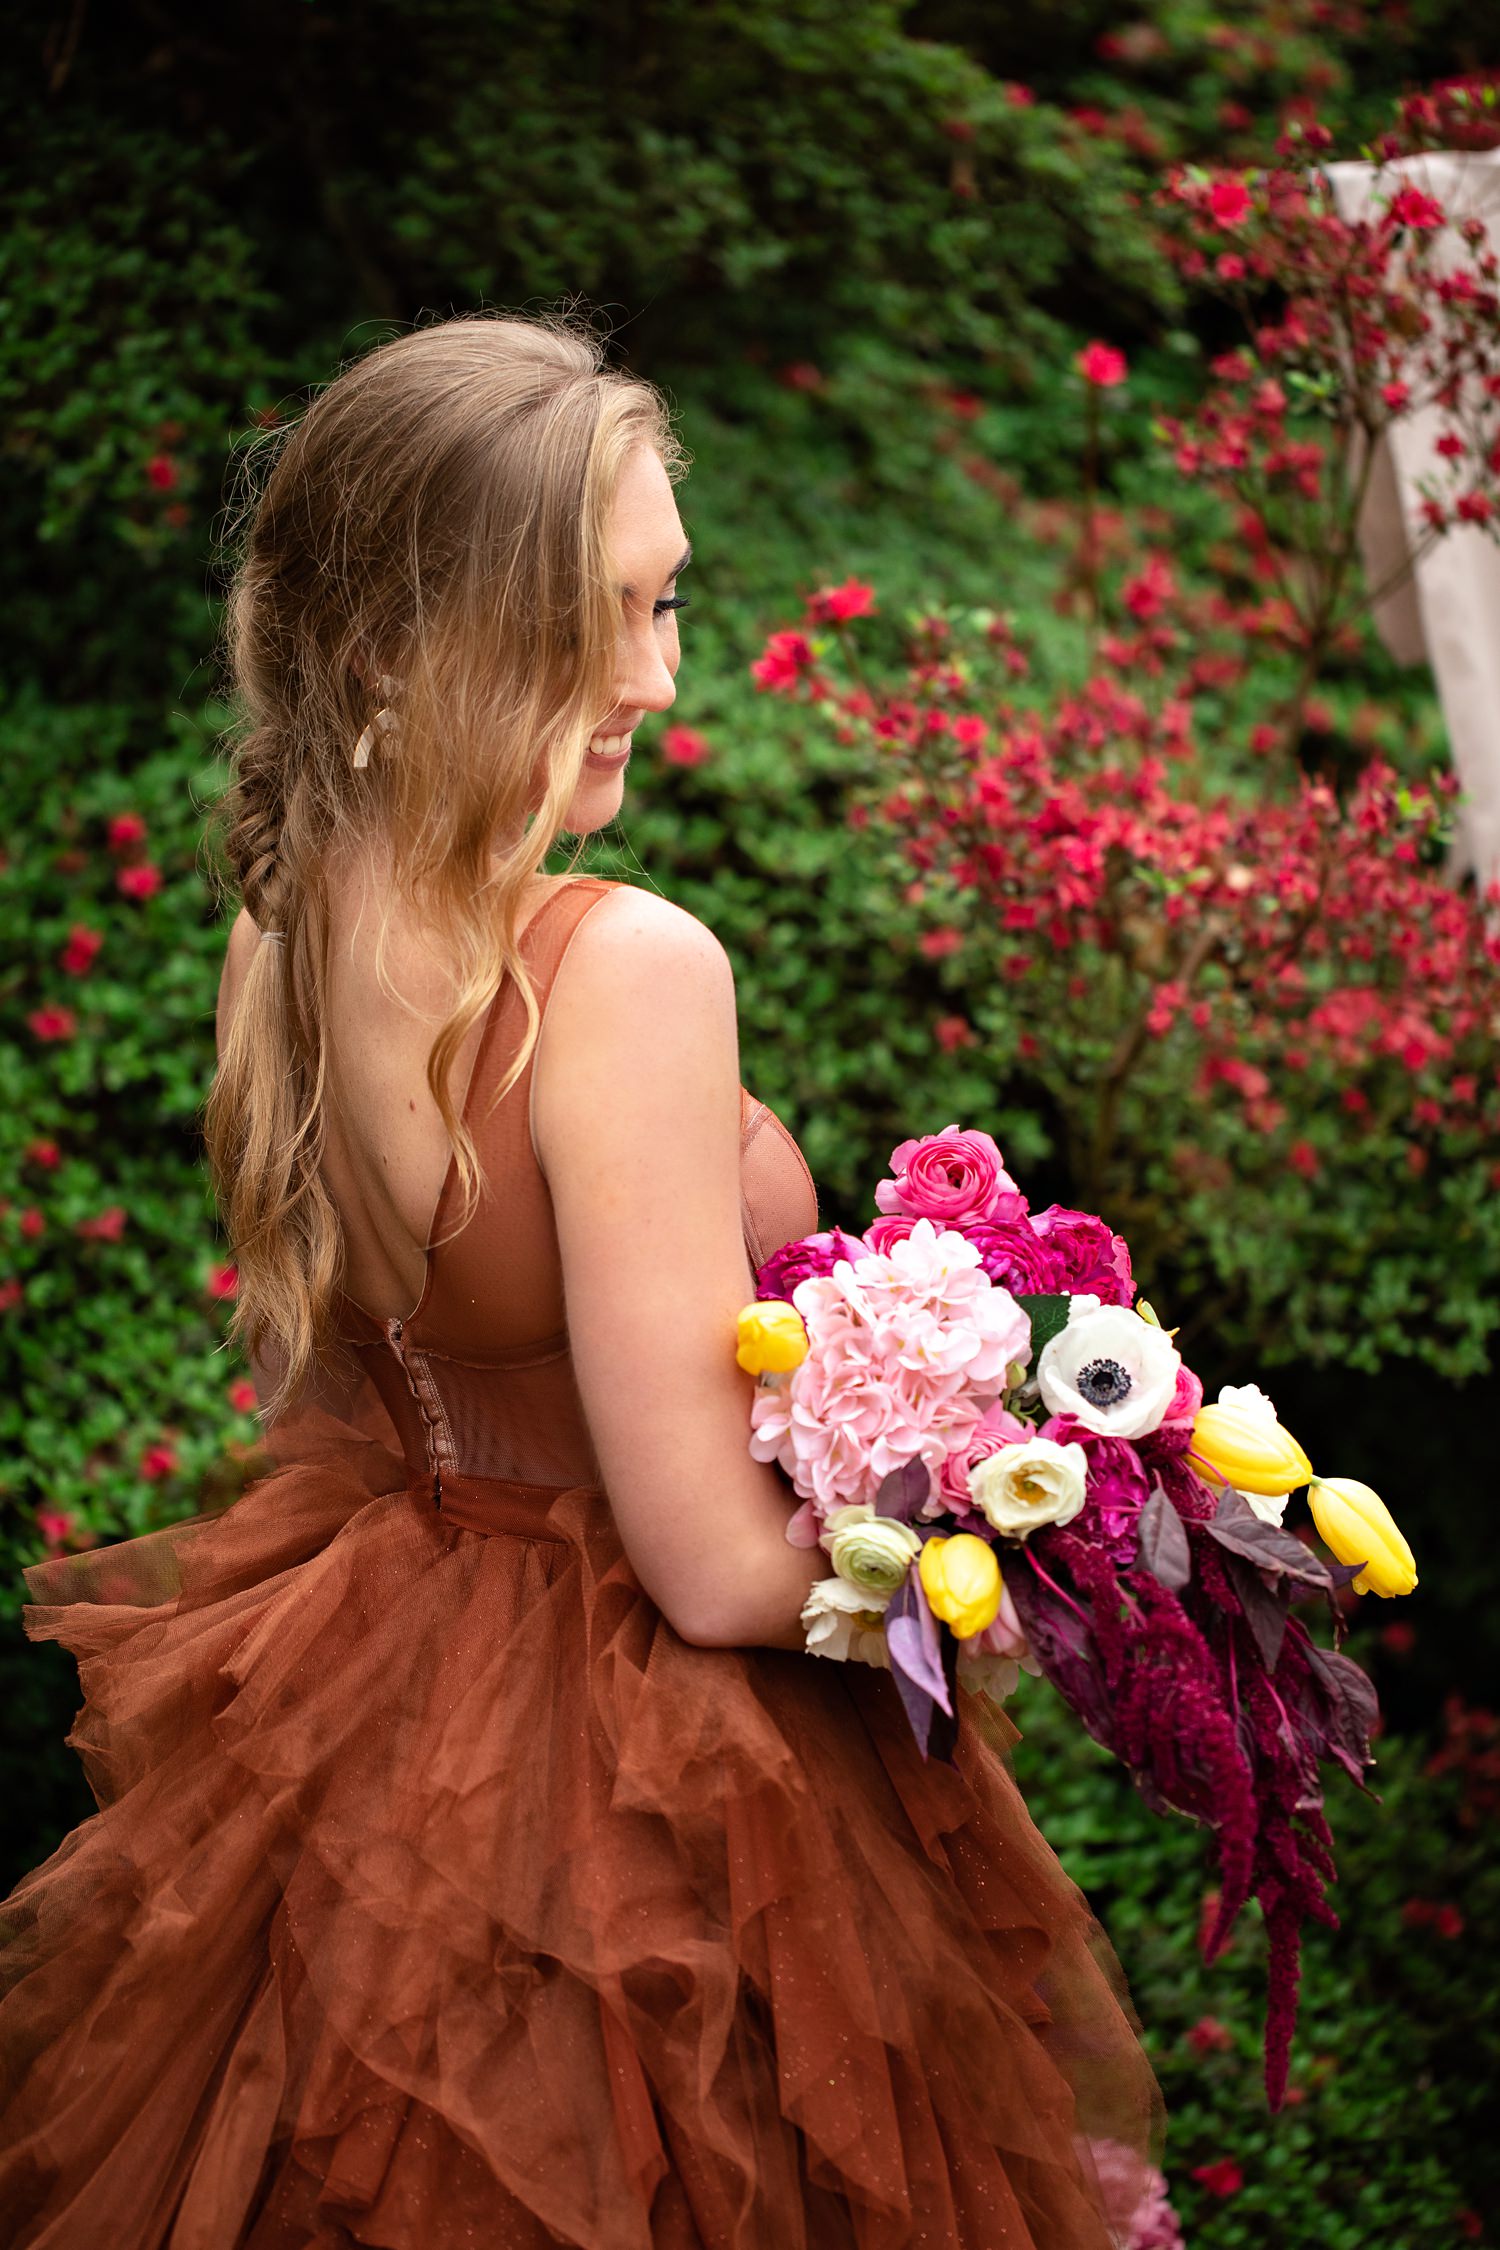 The blonde bride with loose fishtail braid models a colourful bouquet with anemones, country roses, tulips, ranunculus and burgundy amaranth at her Spring elopement.